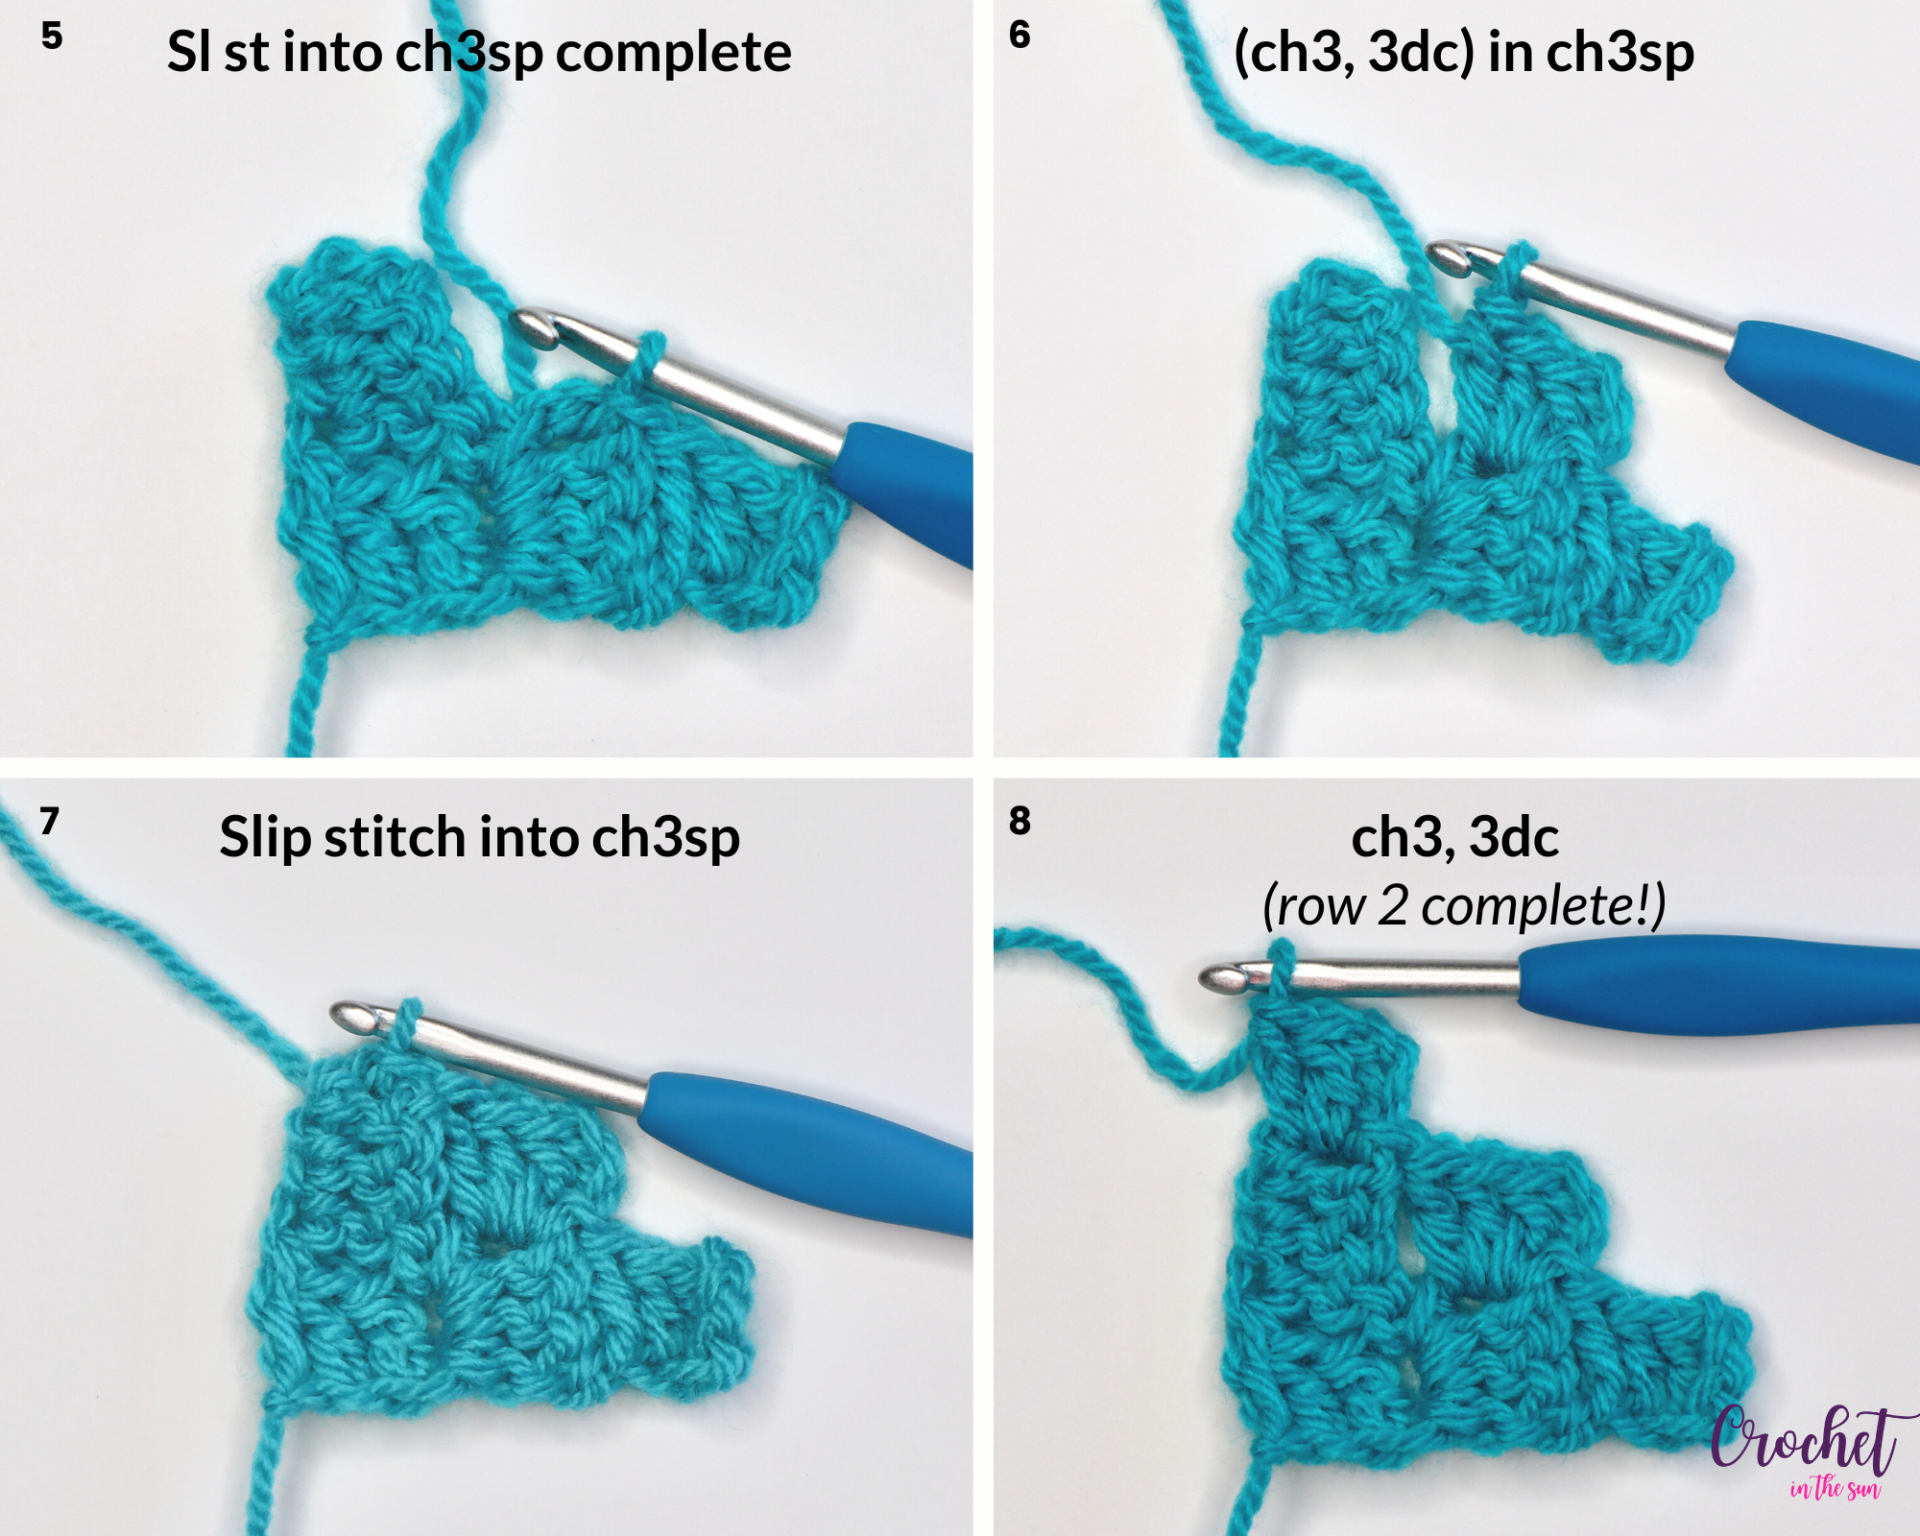 Learn how to corner to corner crochet (photo 5 of 5). This provides a clear, step-by-step photo tutorial for the c2c stitch (corner to corner stitch). This stitch is easy to learn and is beginner friendly. Learn how to crochet! There are so many c2c project ideas you will be able to complete!